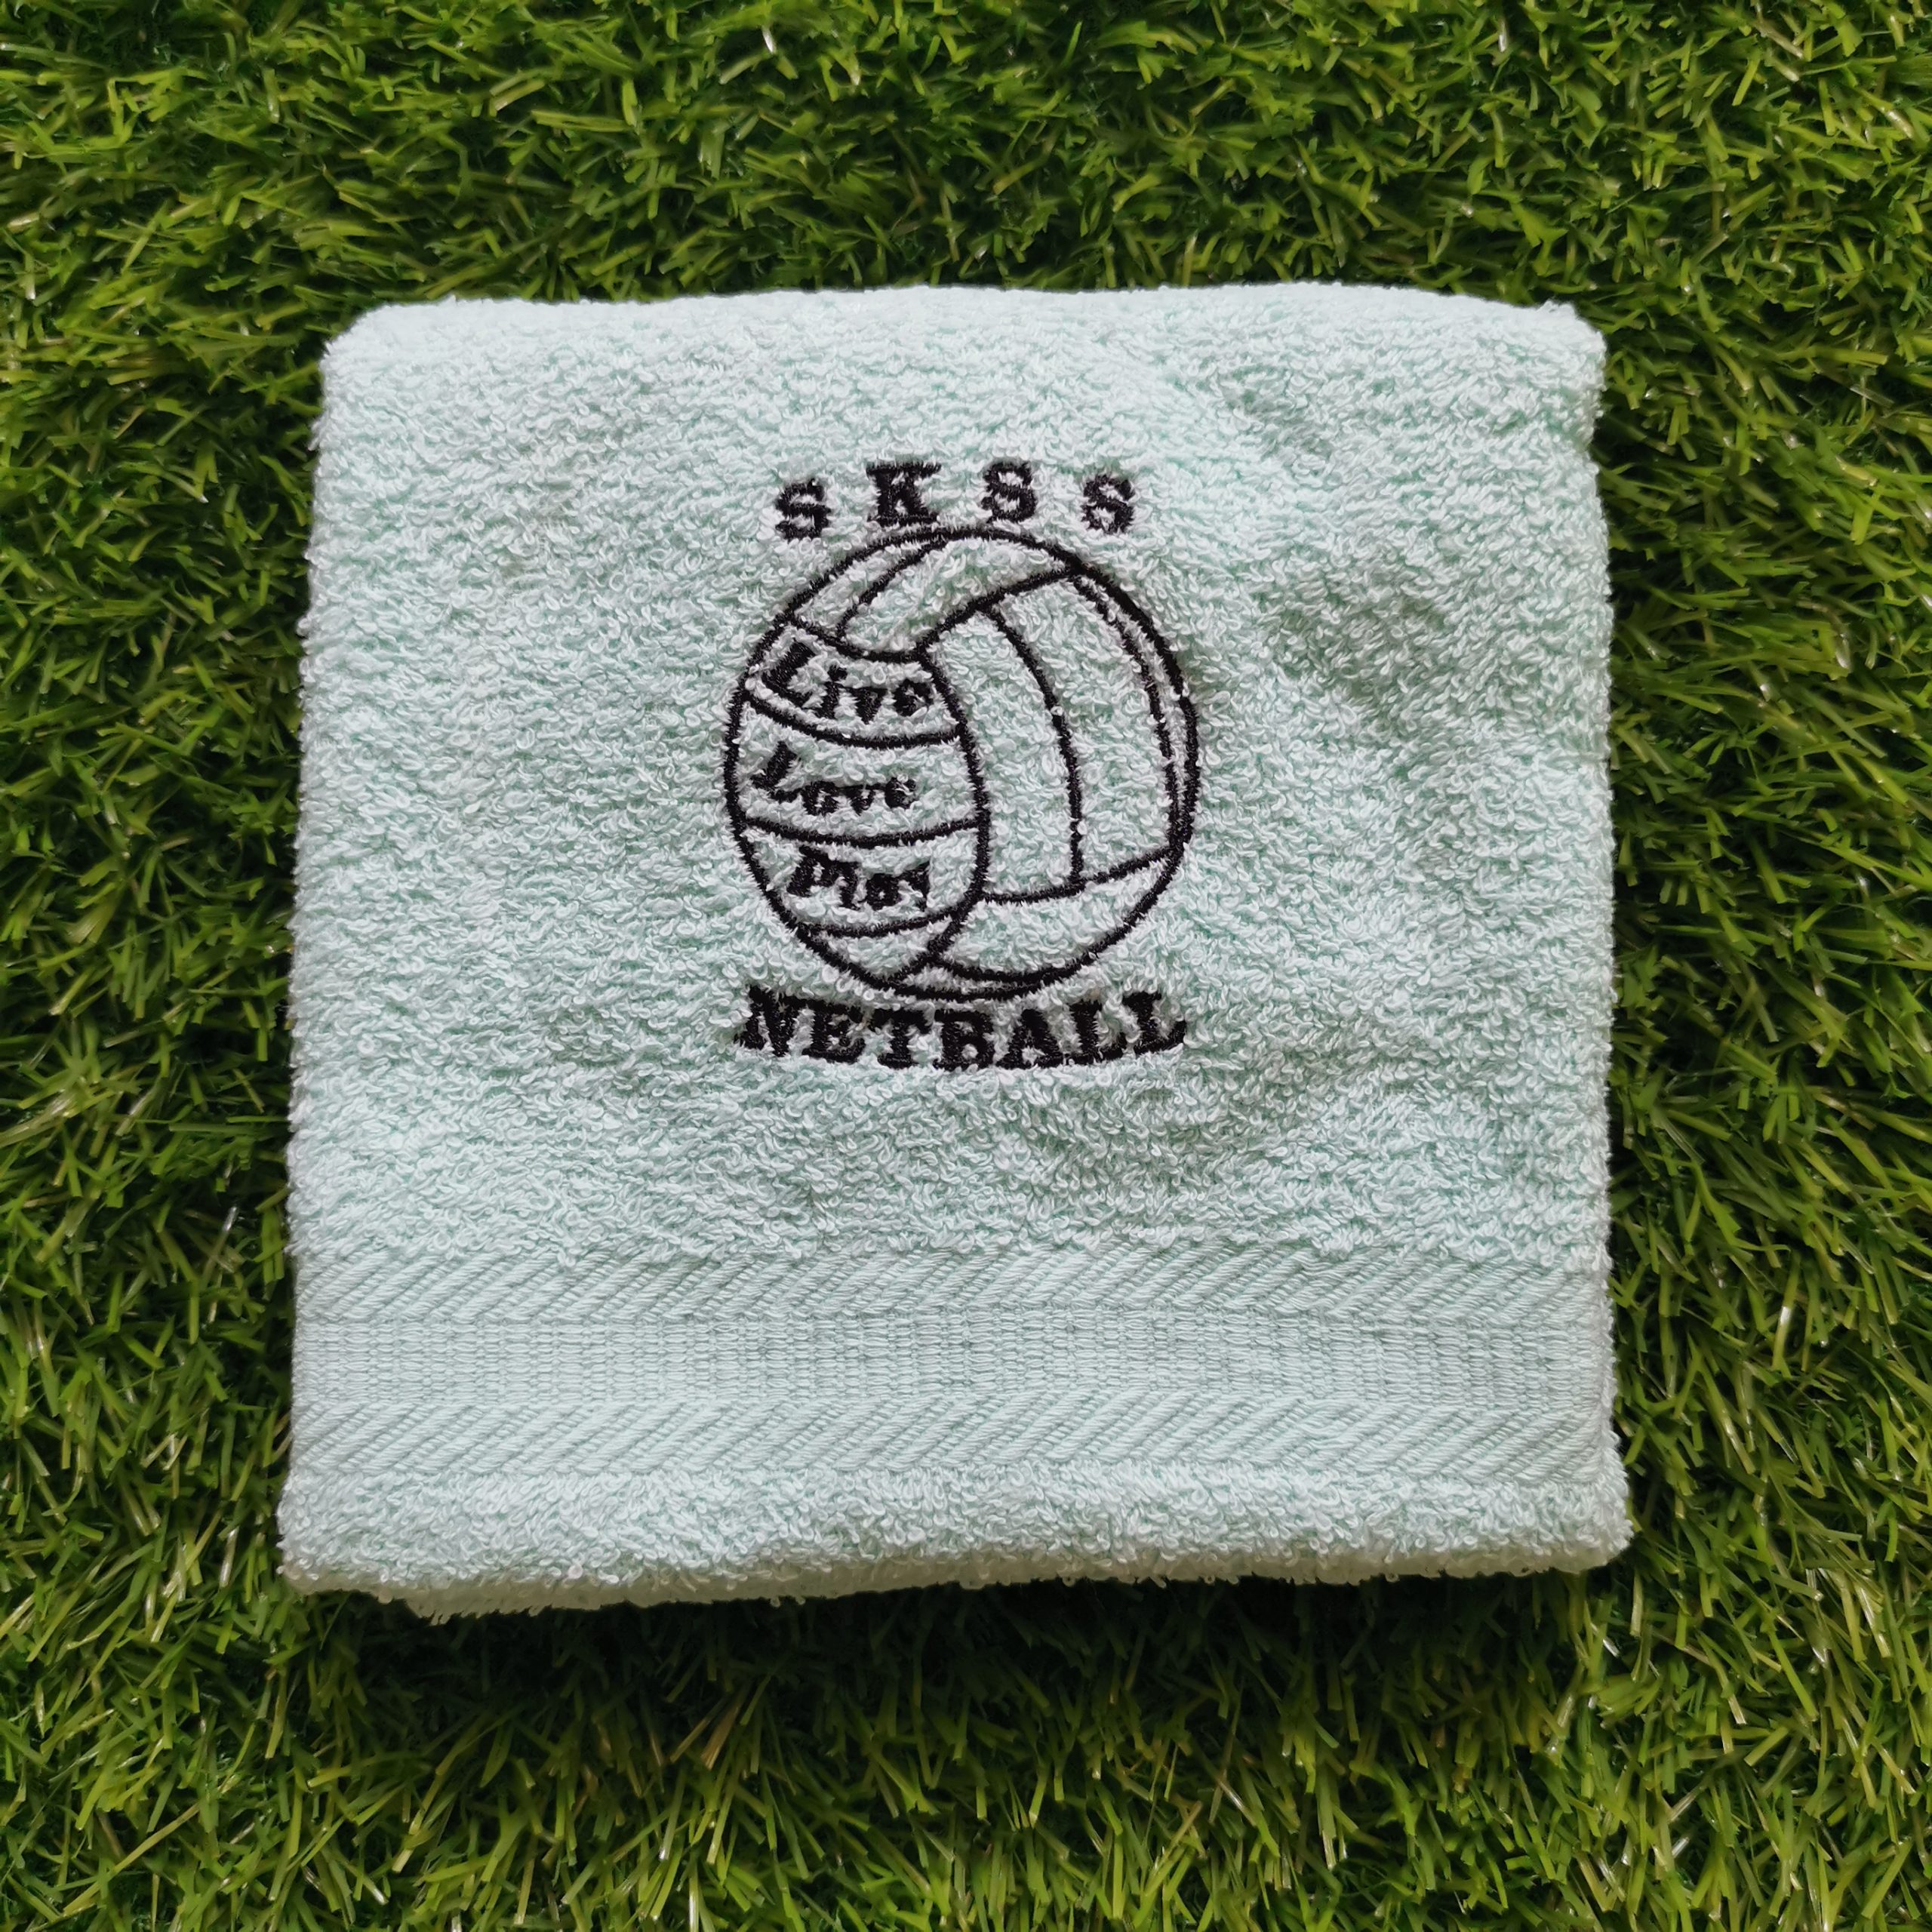 Embroidery Netball design on towels